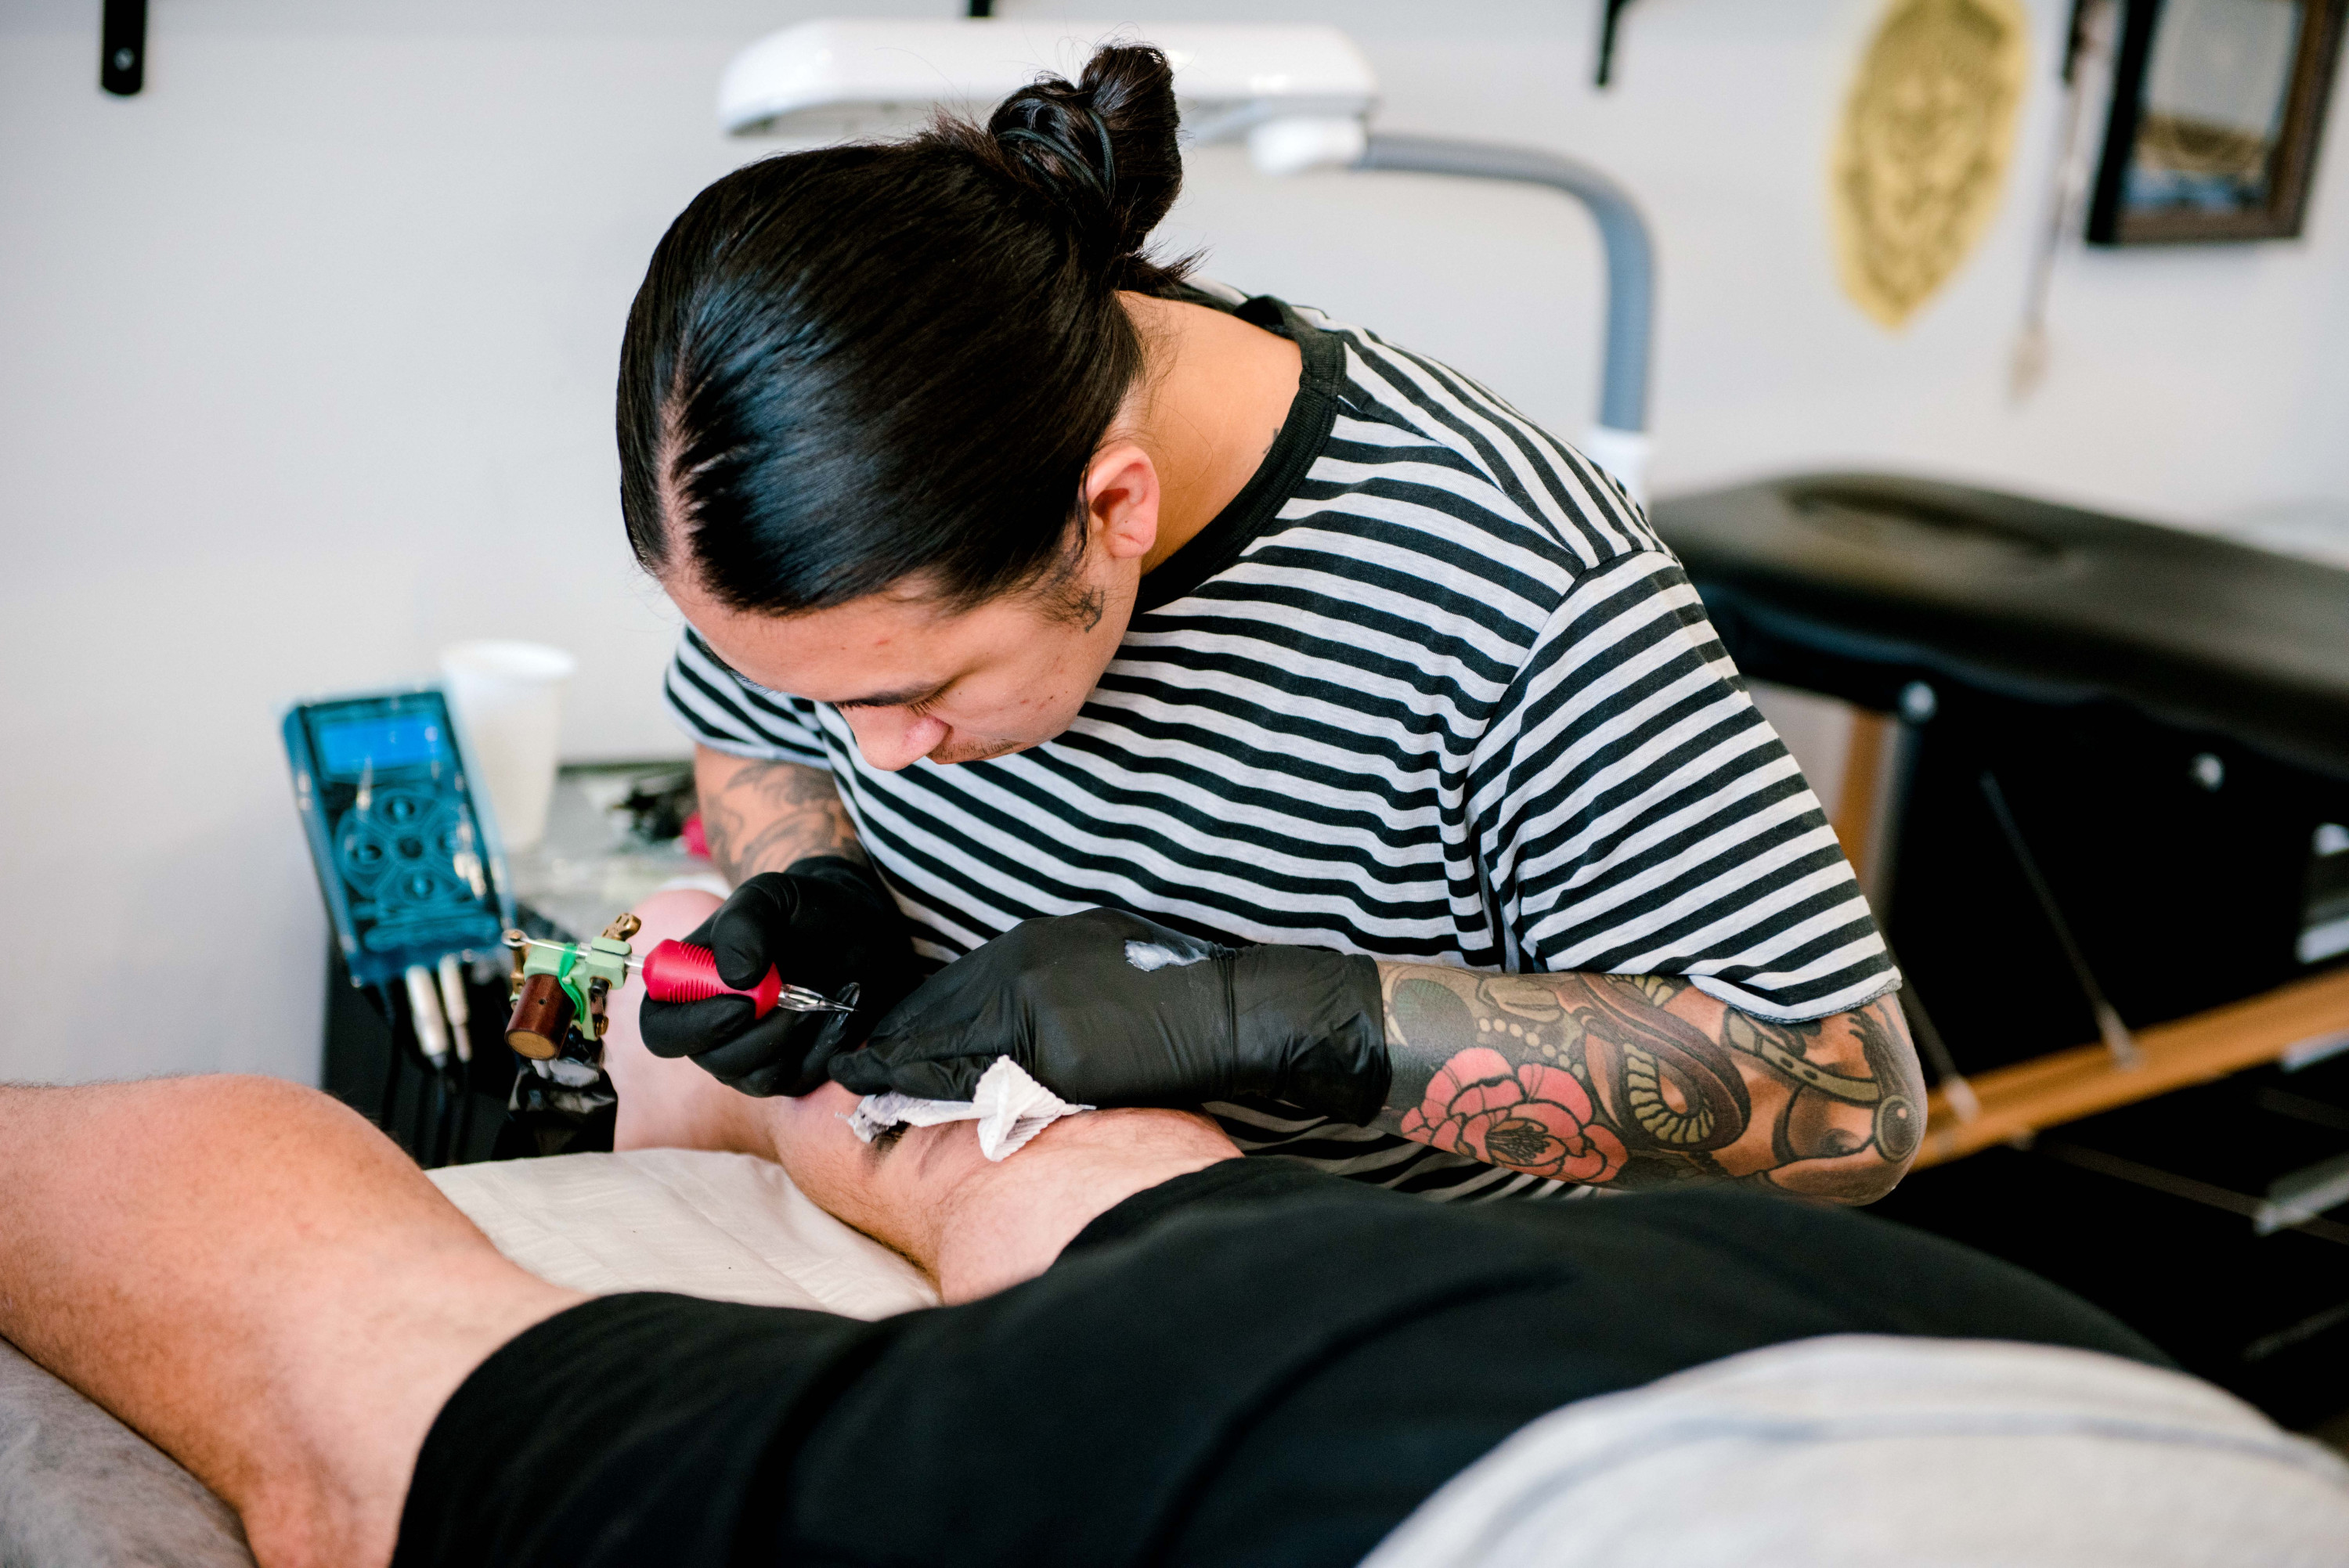 getting a tattoo on the gold coast, on one of the best tattoo parlours on the gold coast